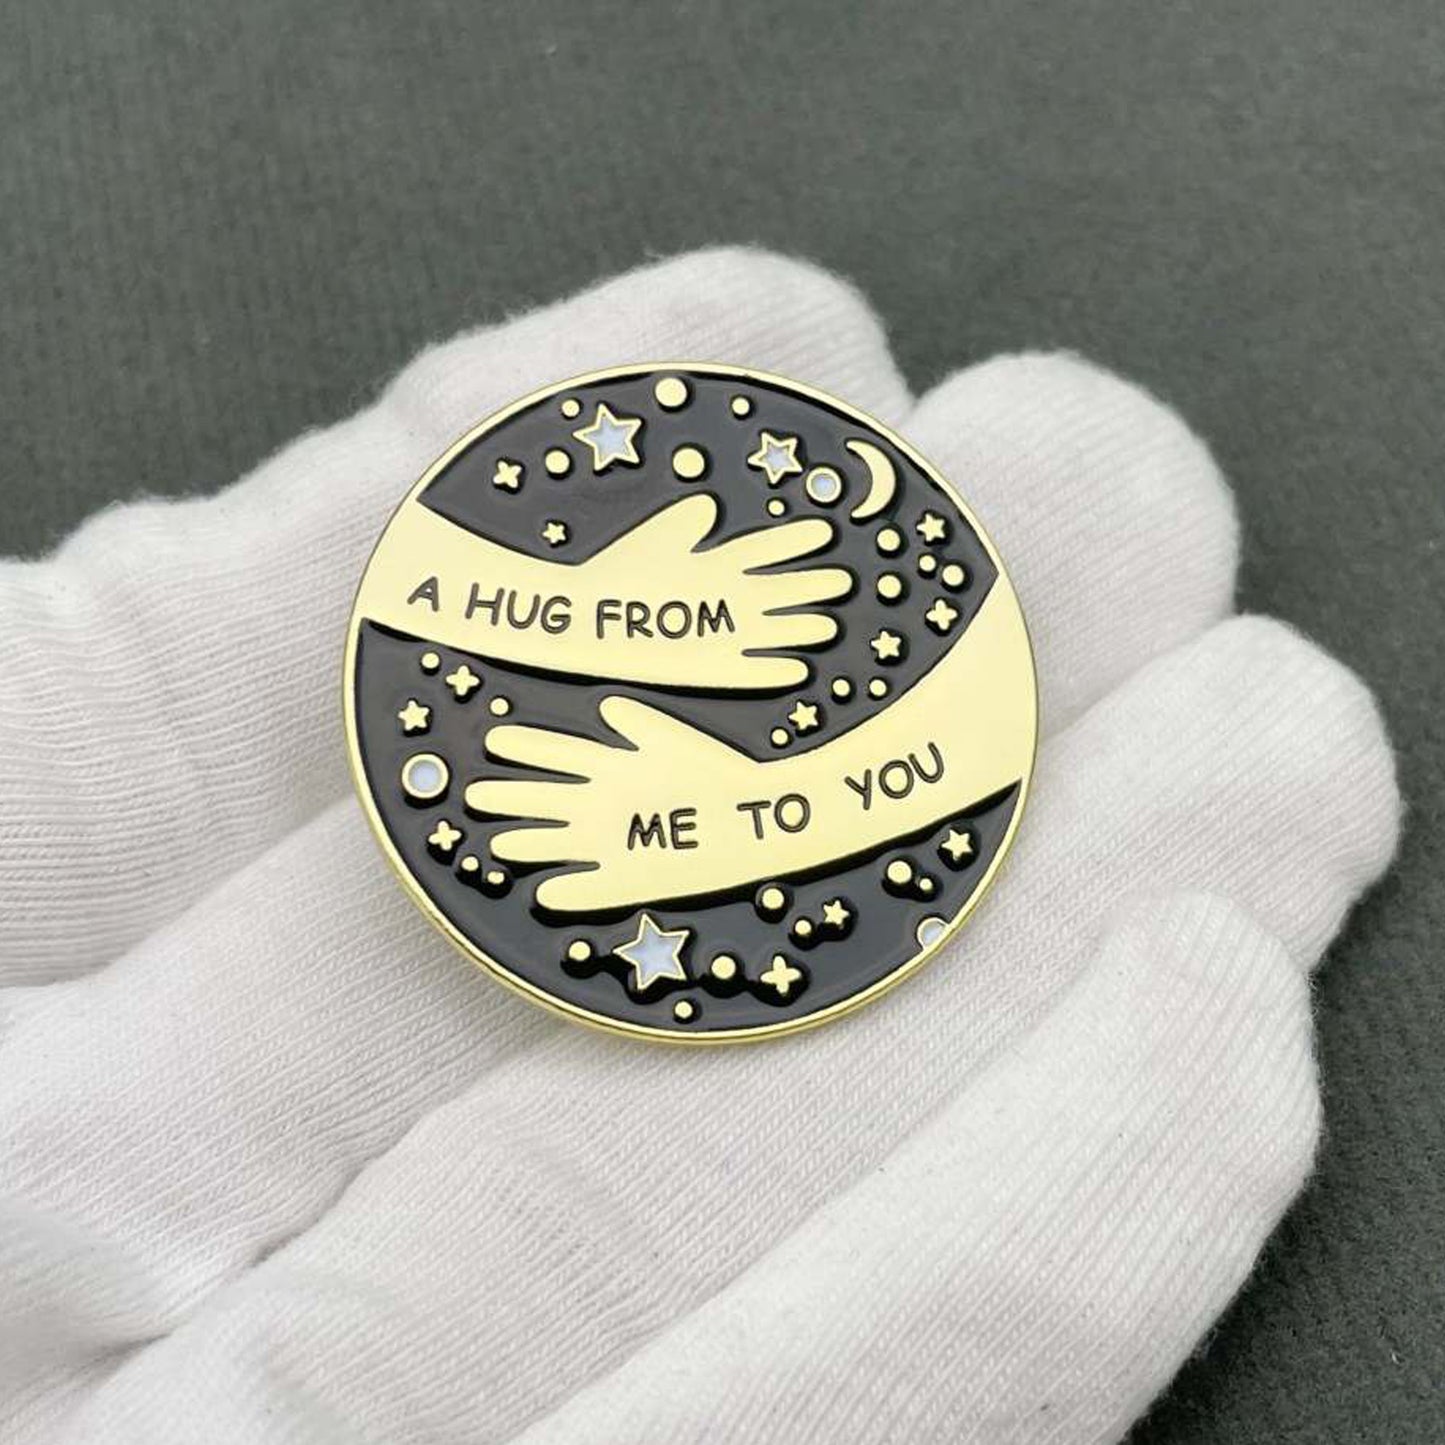 Pocket Hug Pin Badges With Very Special Grandson Star Message Cards